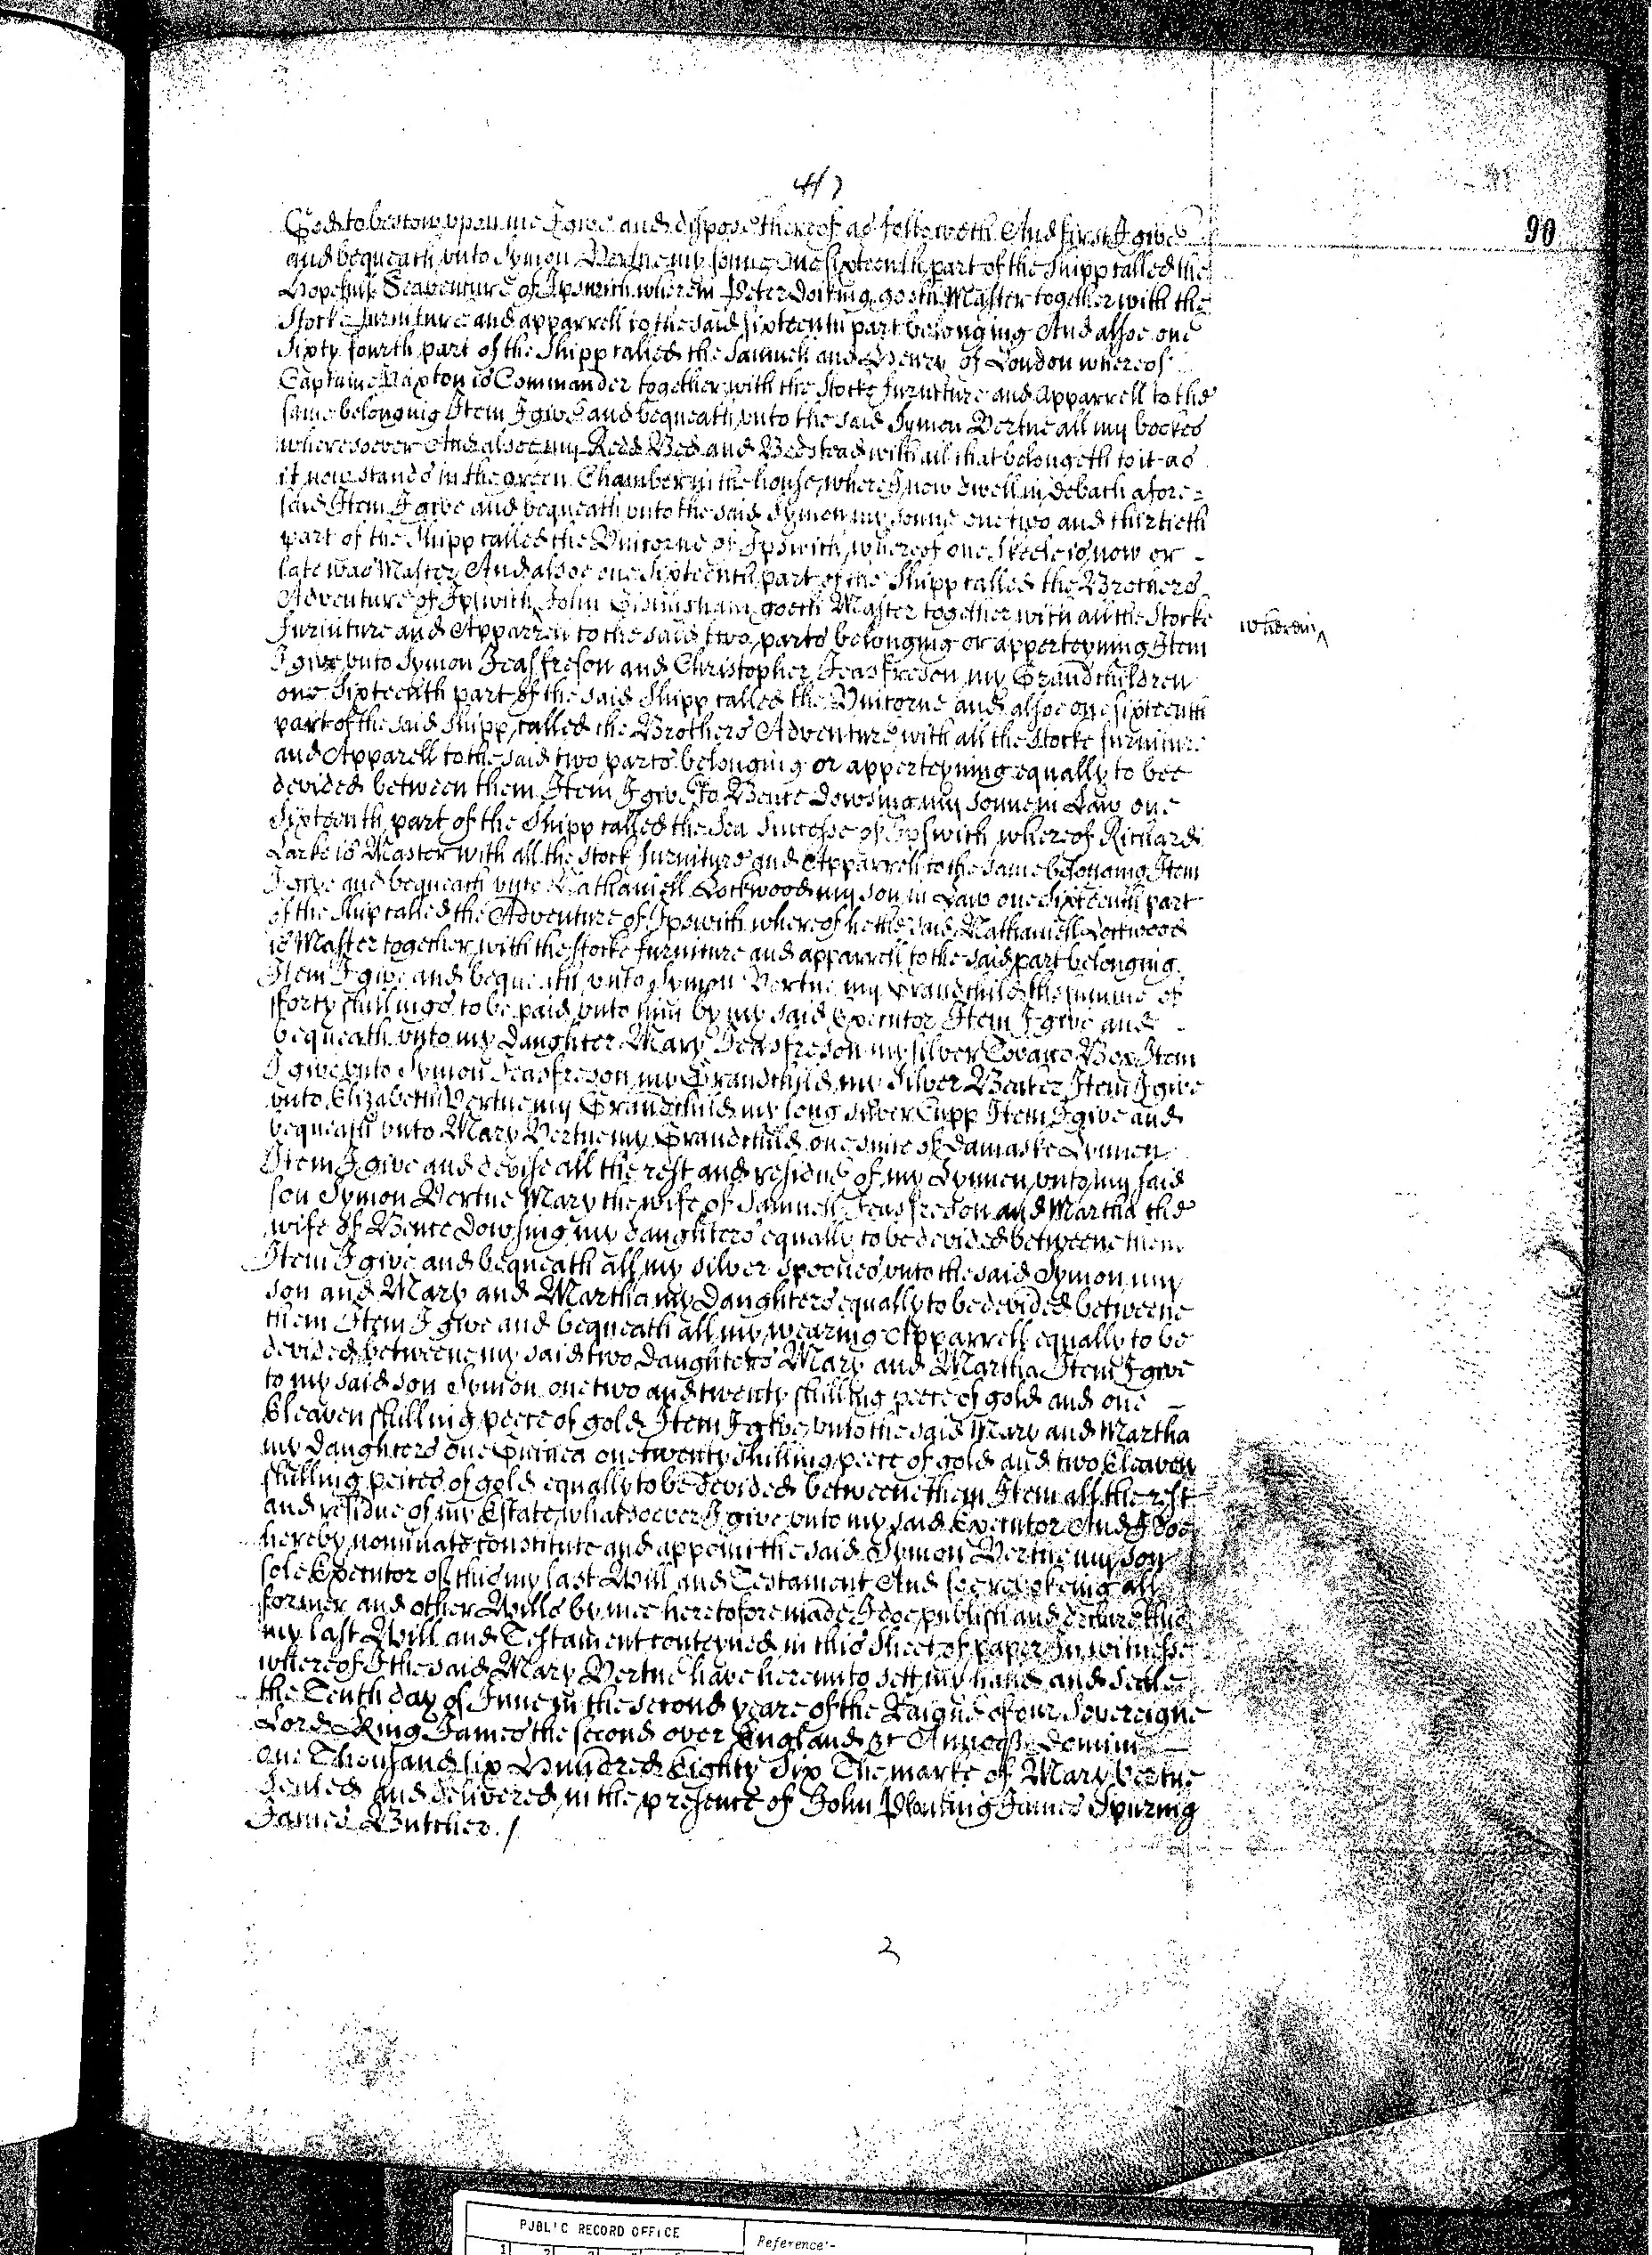 The will of Mary Vertue, 1686, page 2